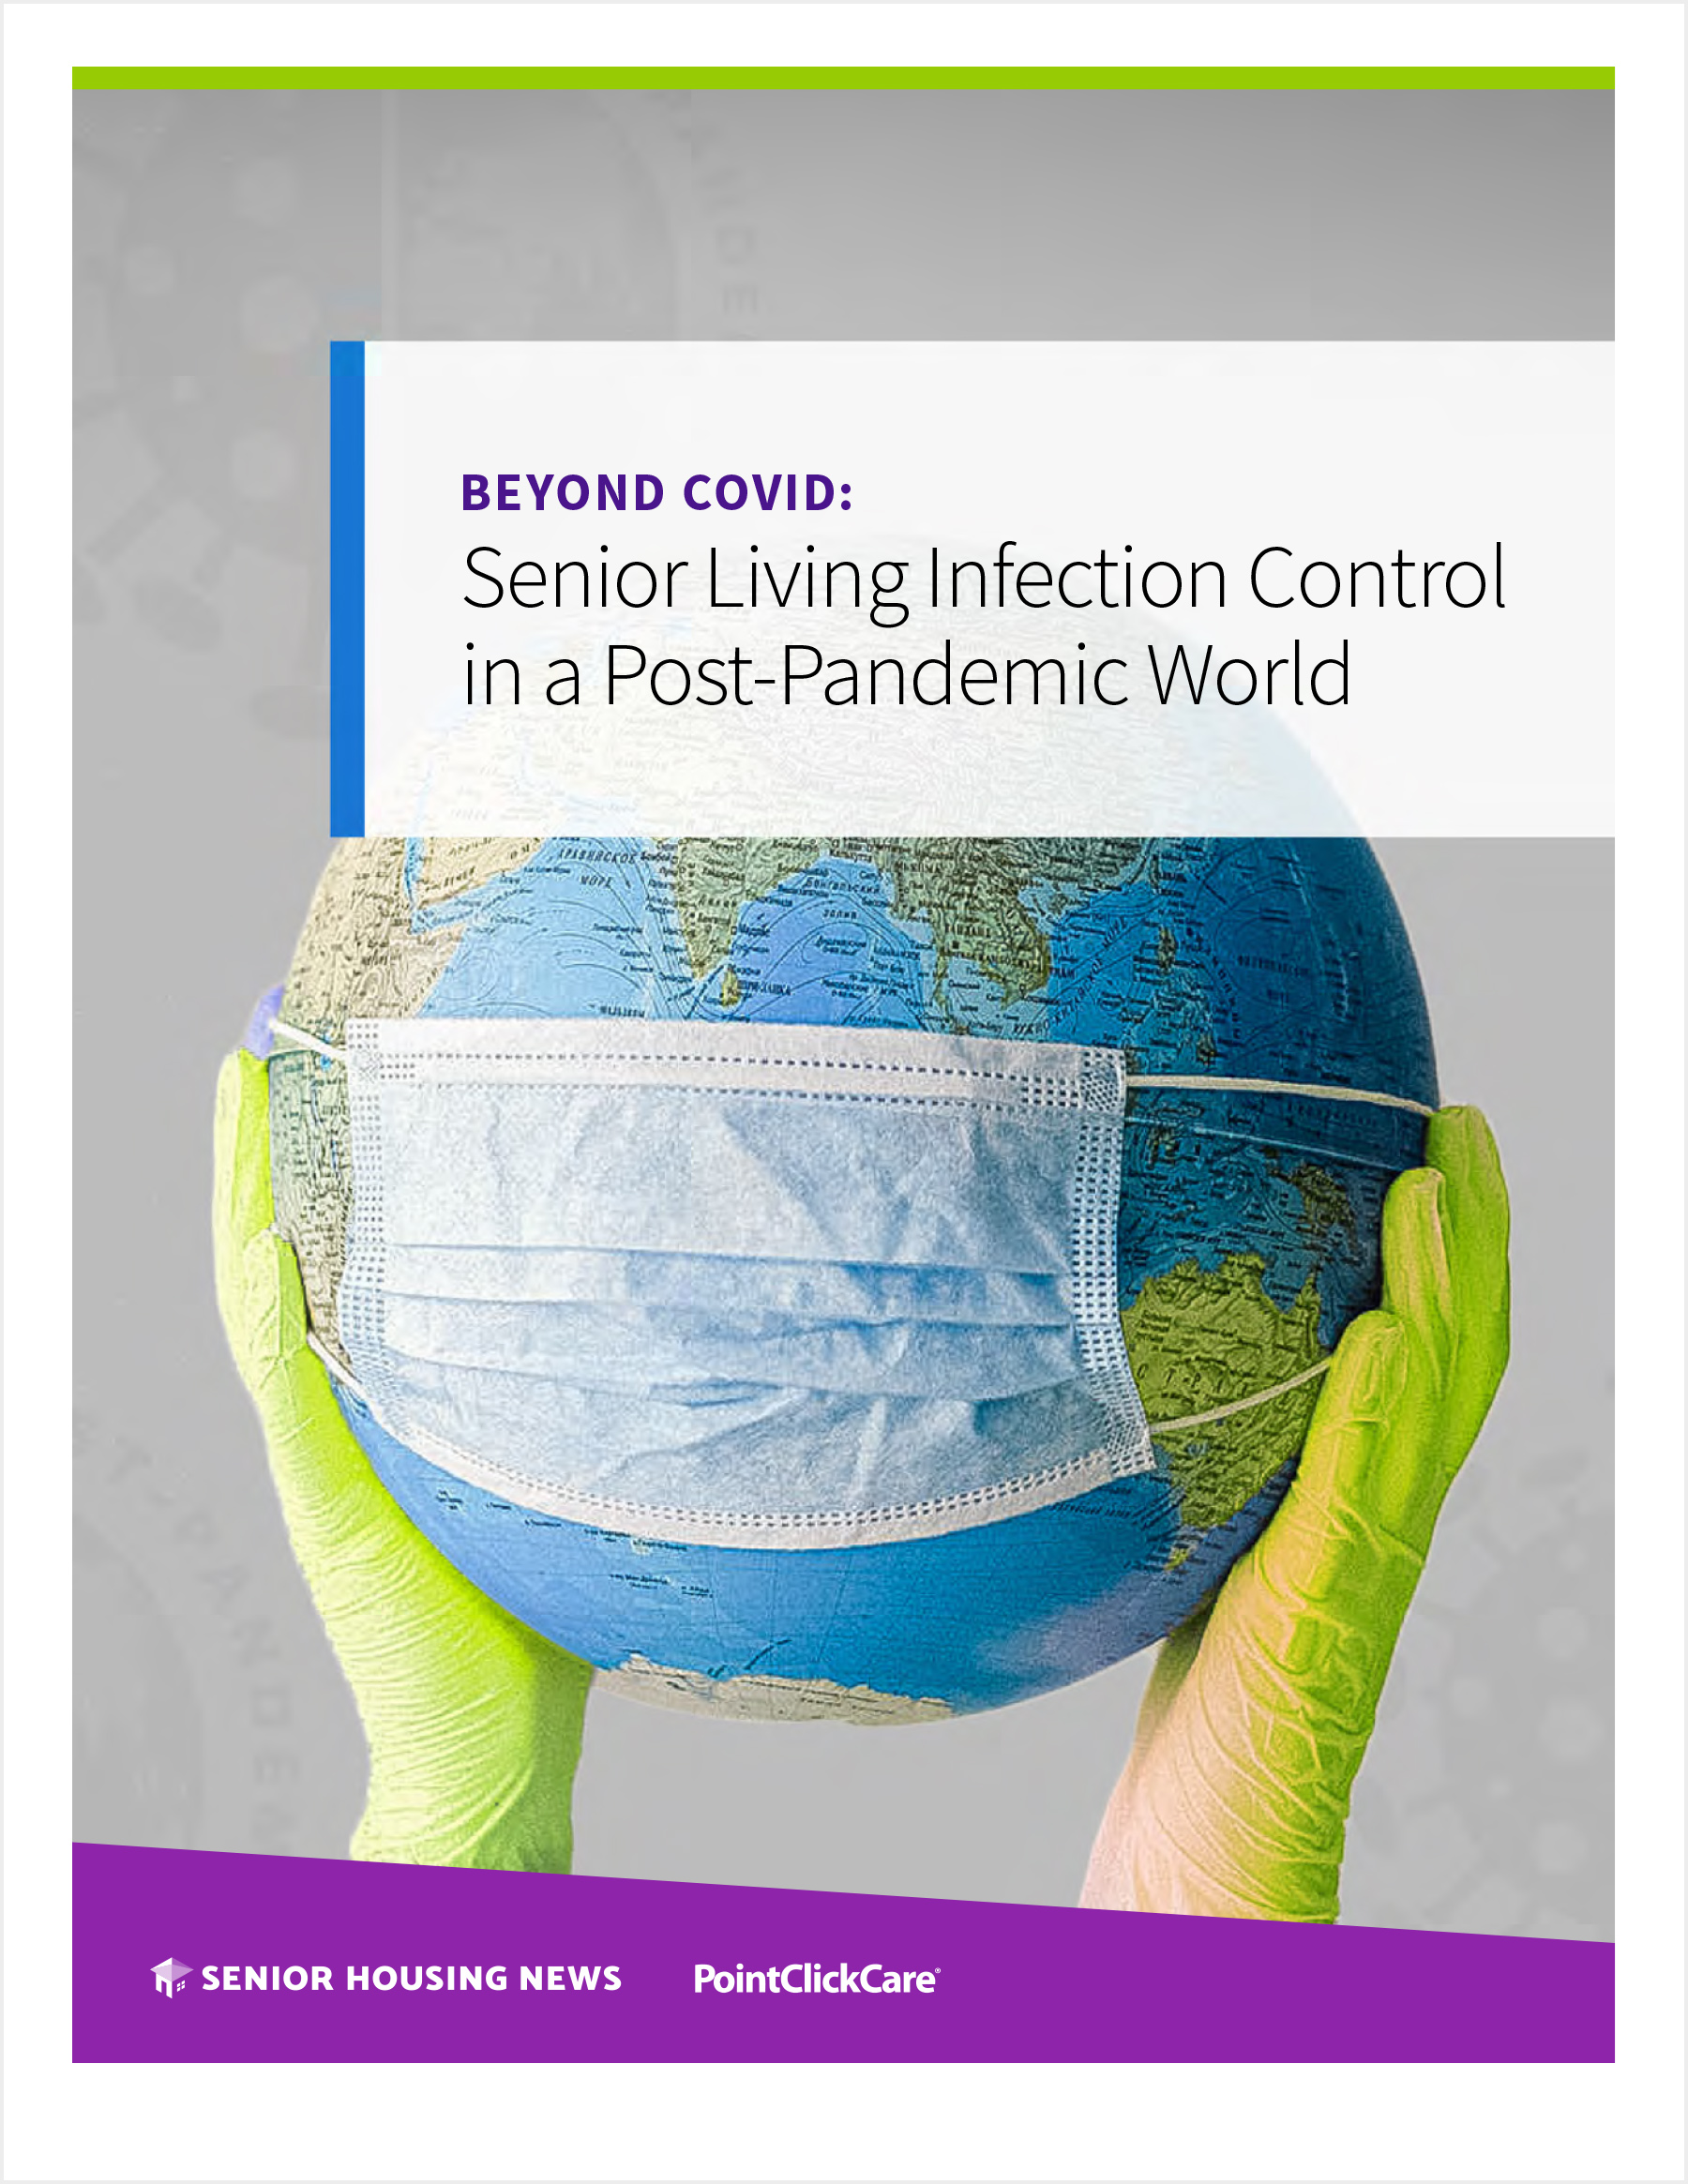 beyond-covid-senior-living-infection-control-in-a-post-pandemic-world-cover-pg